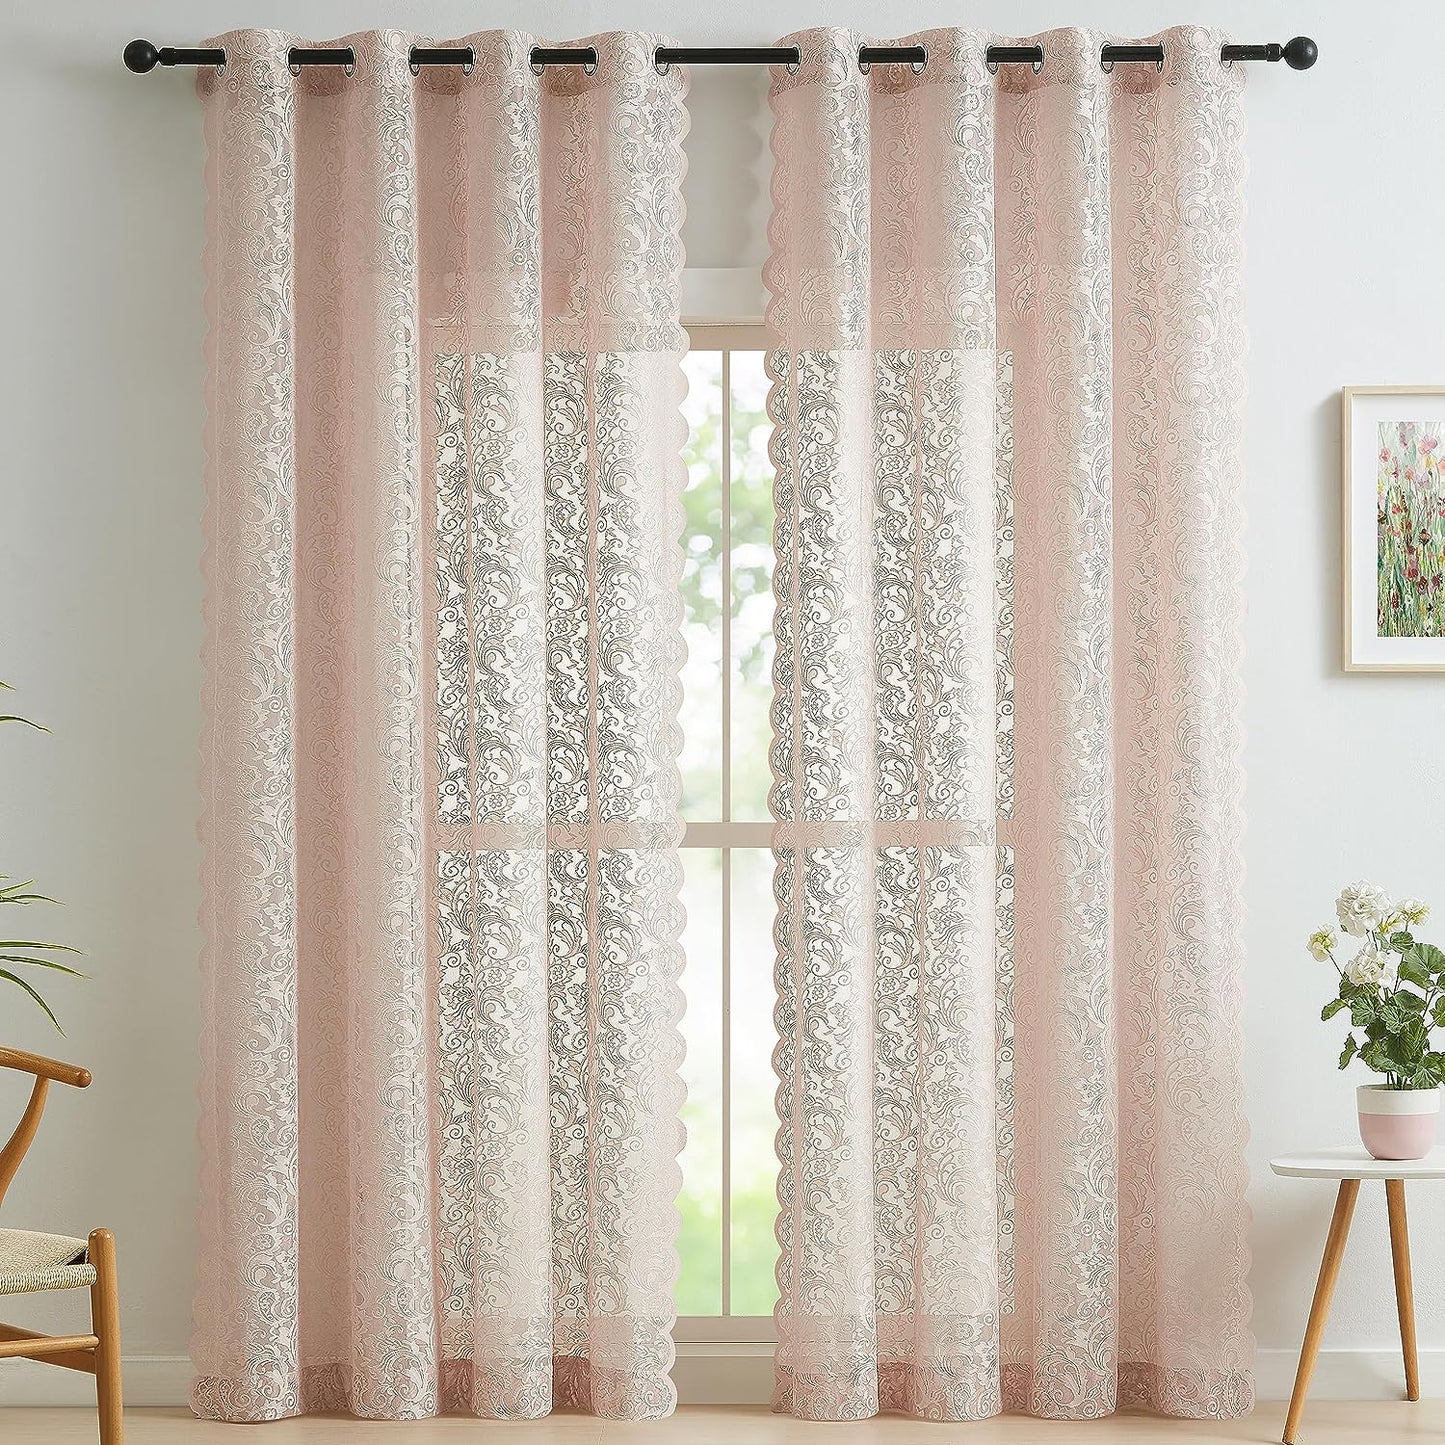 Black Sheer Lace Curtains 84 Inch Vintage Floral Sheer Gothic Curtain Panels for Living Room Bedroom Luxury Light Filtering Drapes Black Window Treatment Sets Rod Pocket 2 Panels 54" Wx84 L  Bujasso Grommet Pink 54"X84"X2 